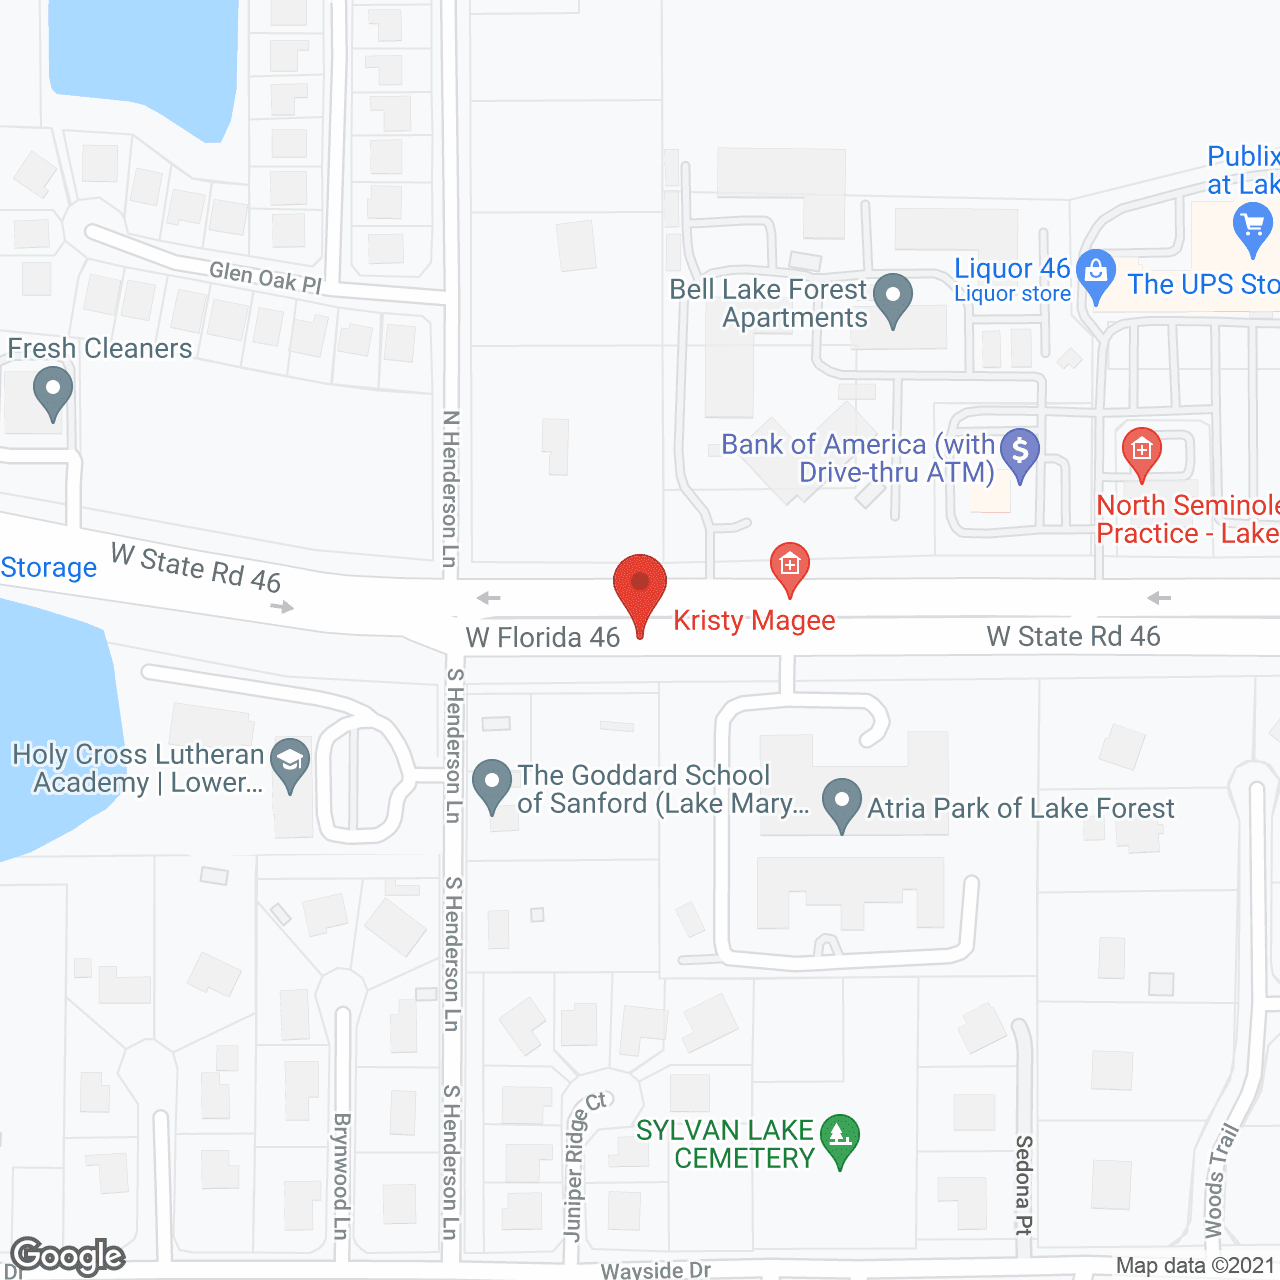 Vitality Living Lake Forest in google map